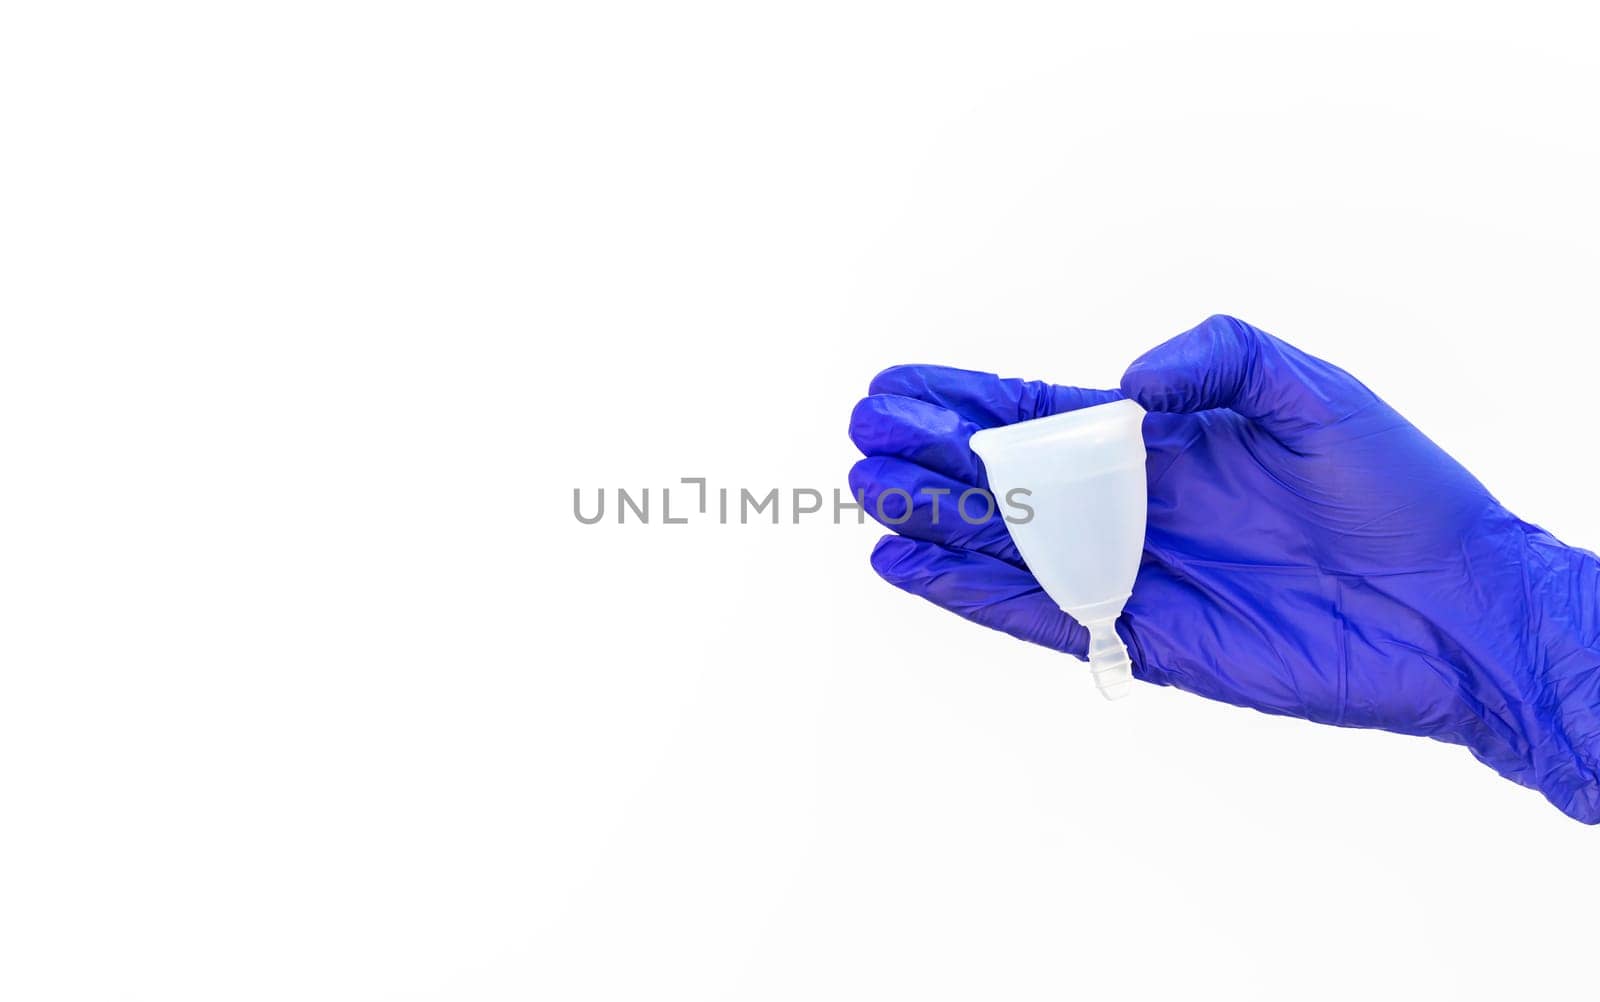 Mockup World Menstrual Hygiene Day On May, 28. Isolated Human Hand in Glove Holds Menstrual Cup on White Background. Backdrop Copy Space, Horizontal Plane, Design by netatsi